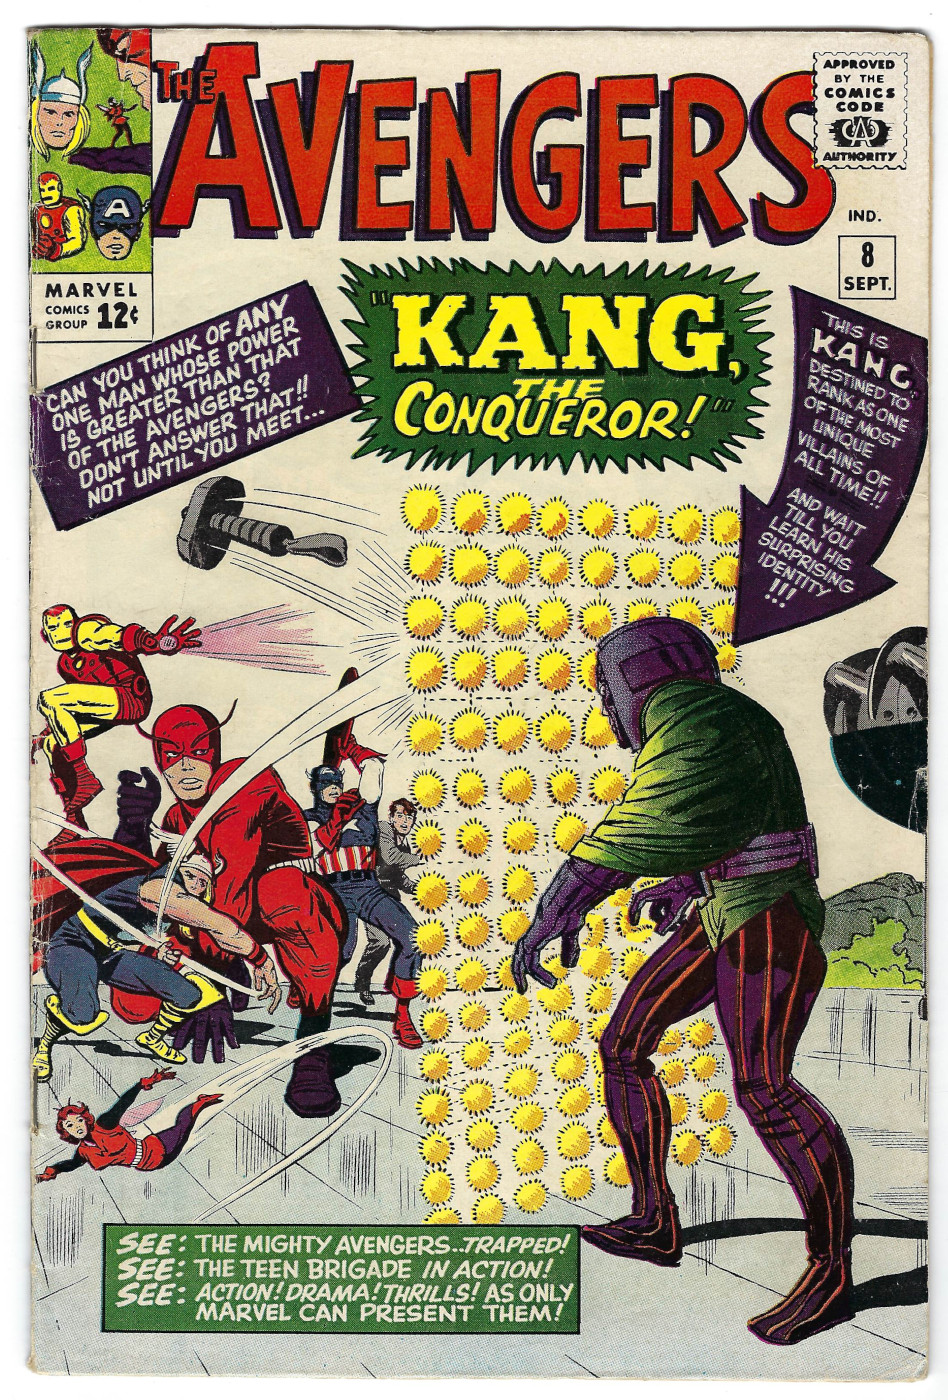 Marvel Comics Avengers (1963) #8: 1st Appearance of Kang the Conqueror